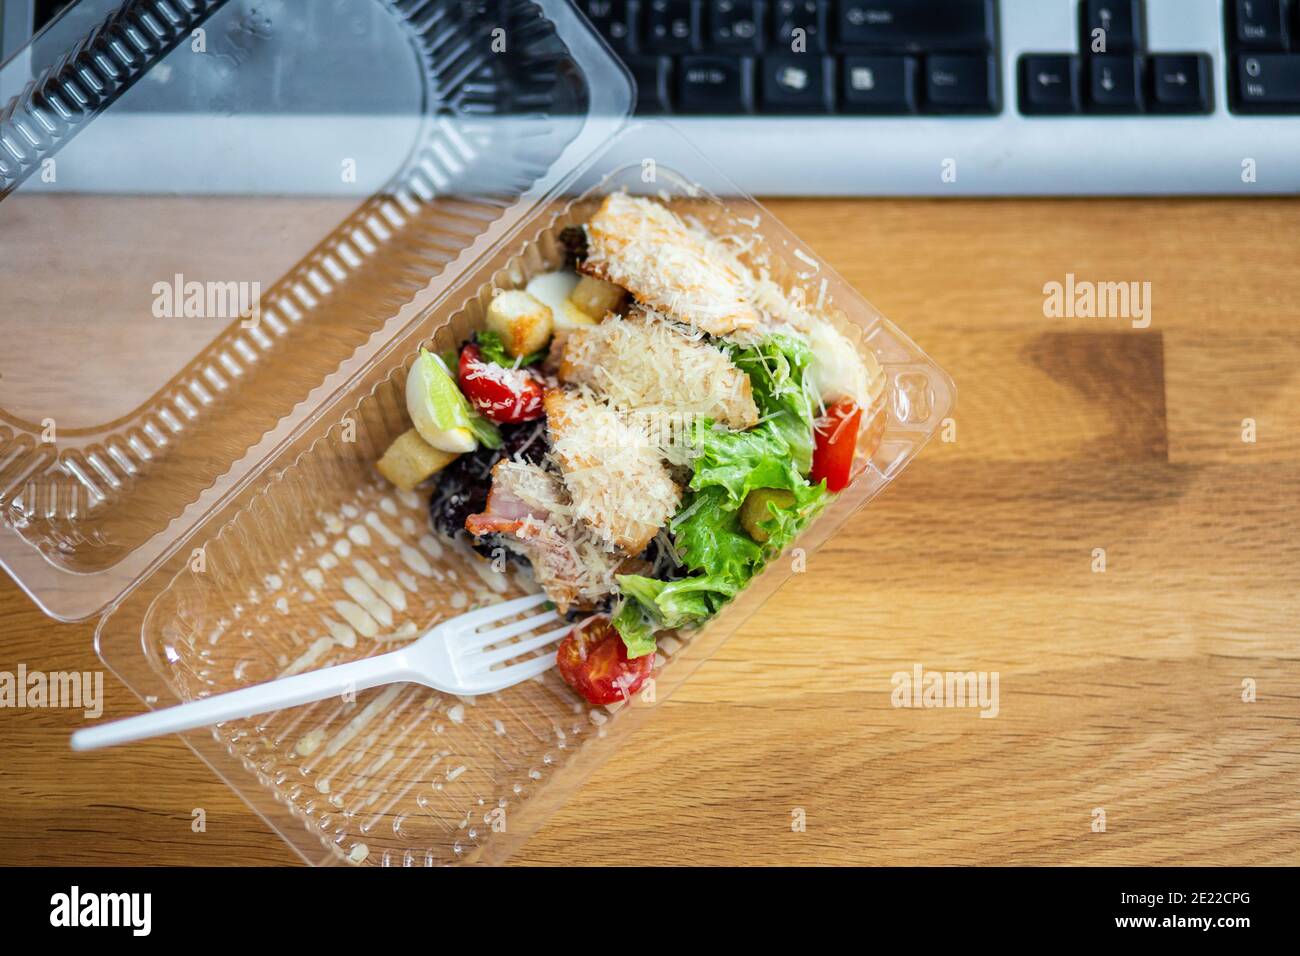 Delivery of takeout meal salad to workplace Stock Photo